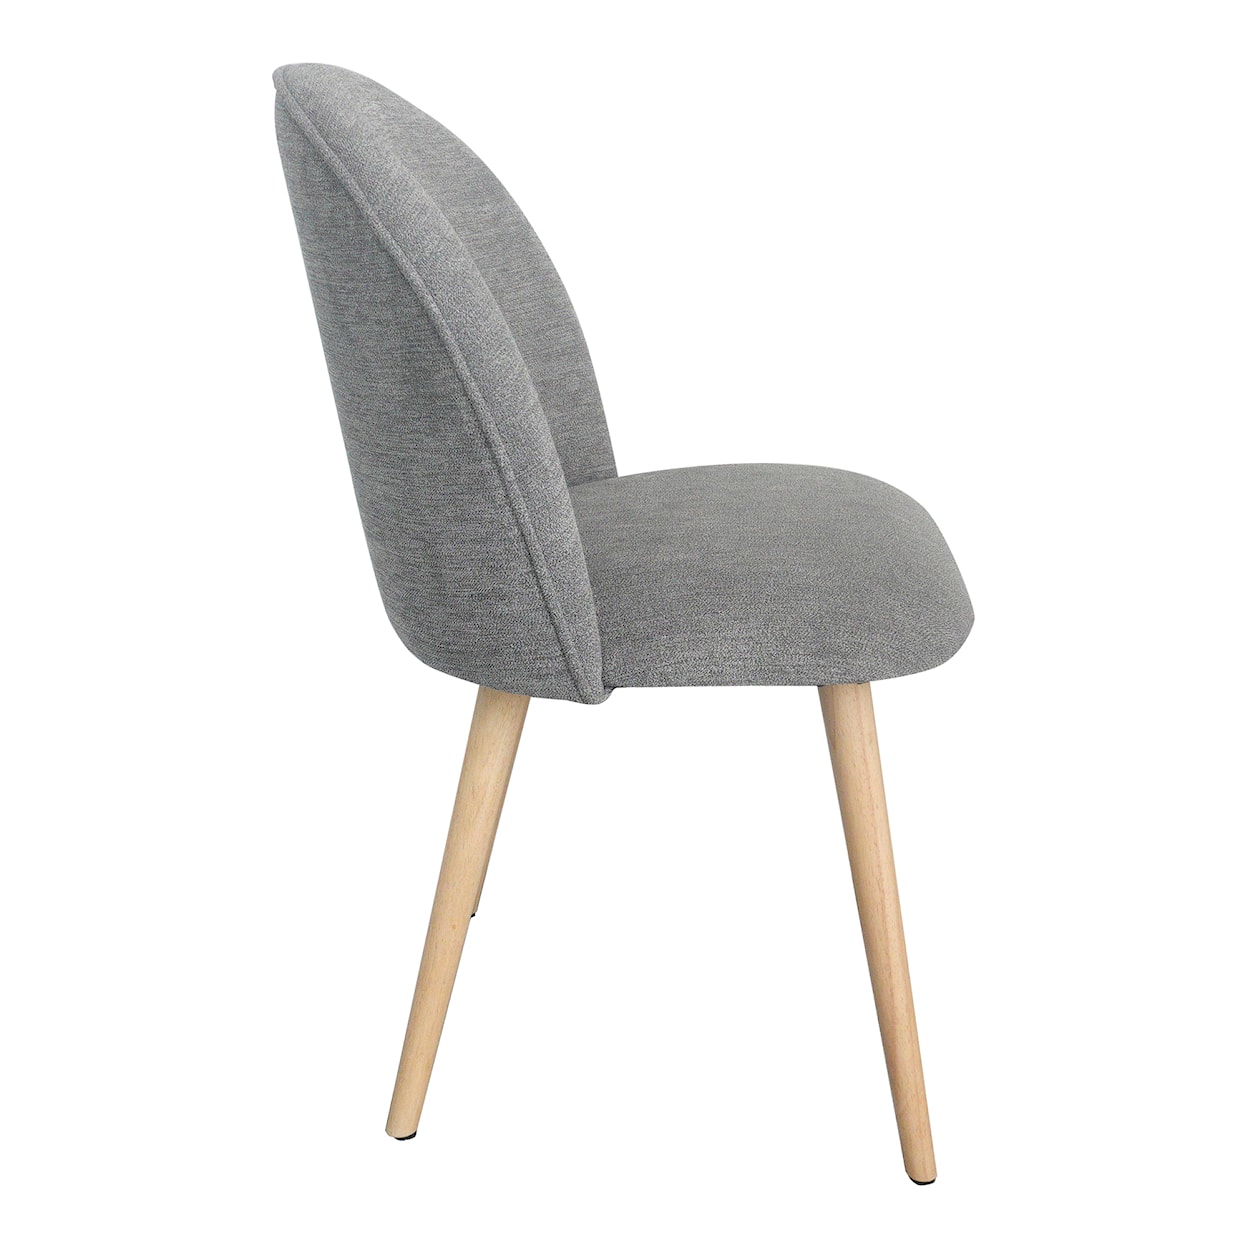 Moe's Home Collection Clarissa Clarissa Dining Chair Grey-M2